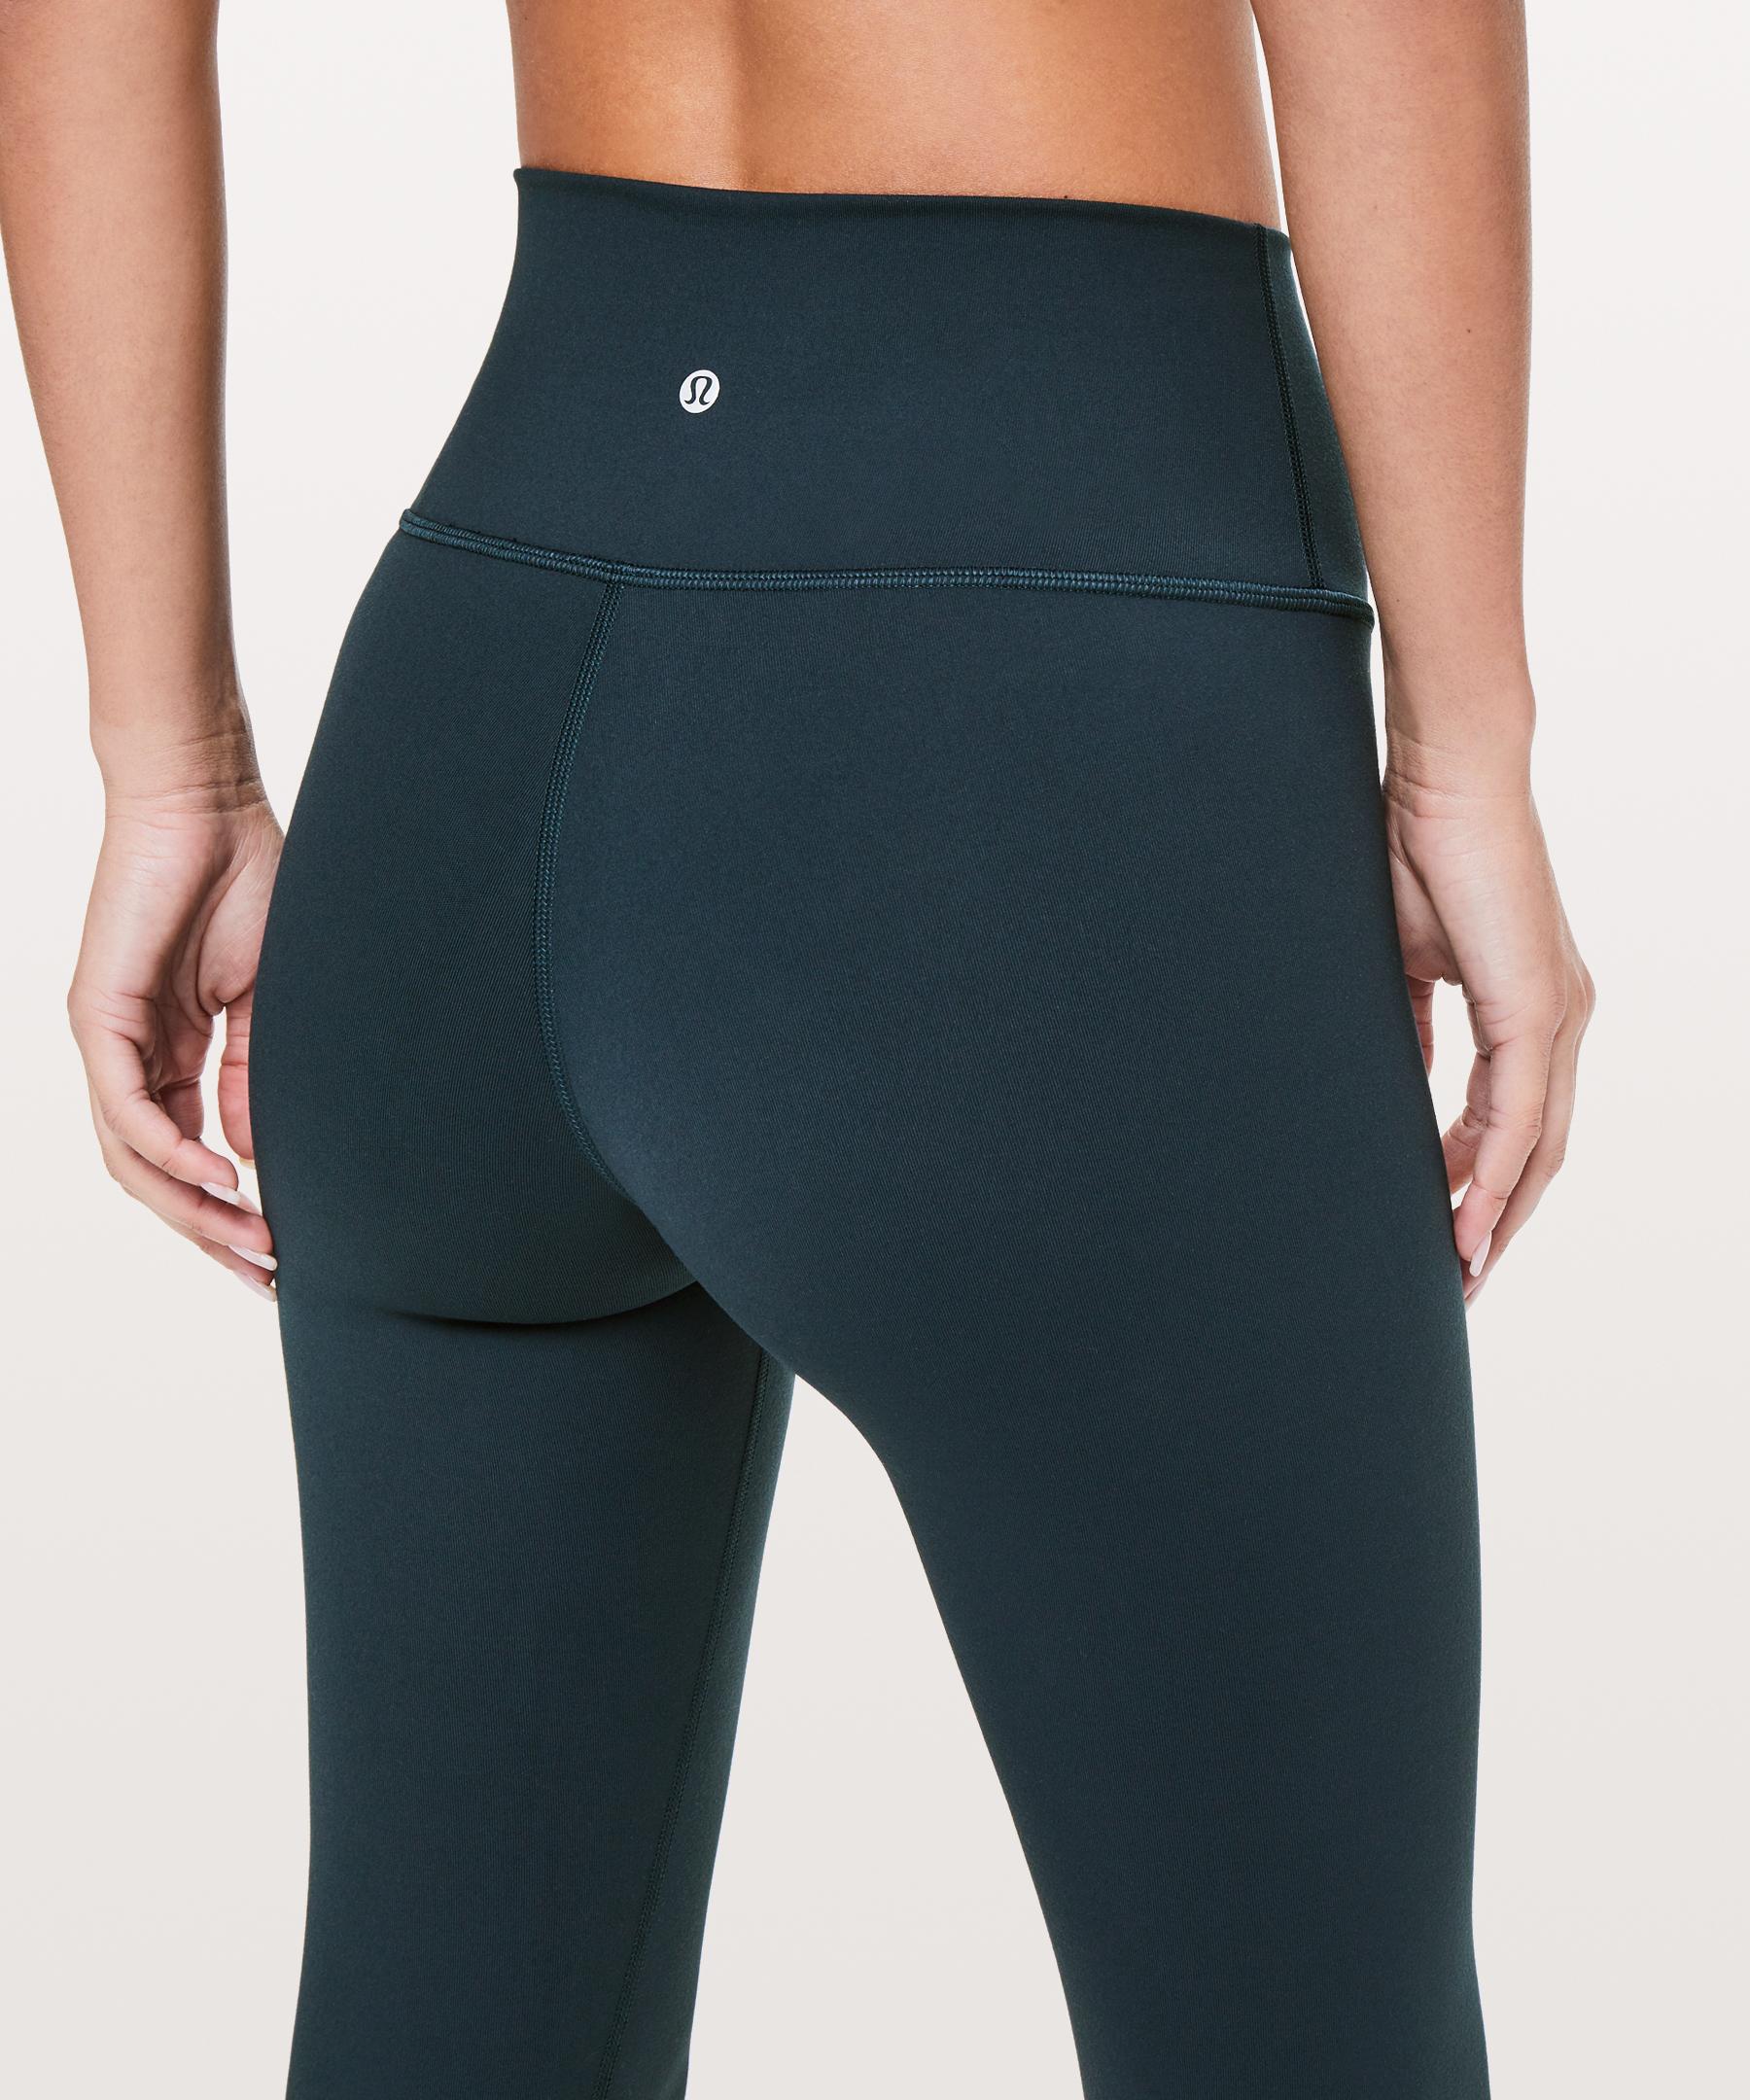 Lululemon Wunder Under Low-Rise Tight *Full-On Luon 28 - Nocturnal Teal -  lulu fanatics